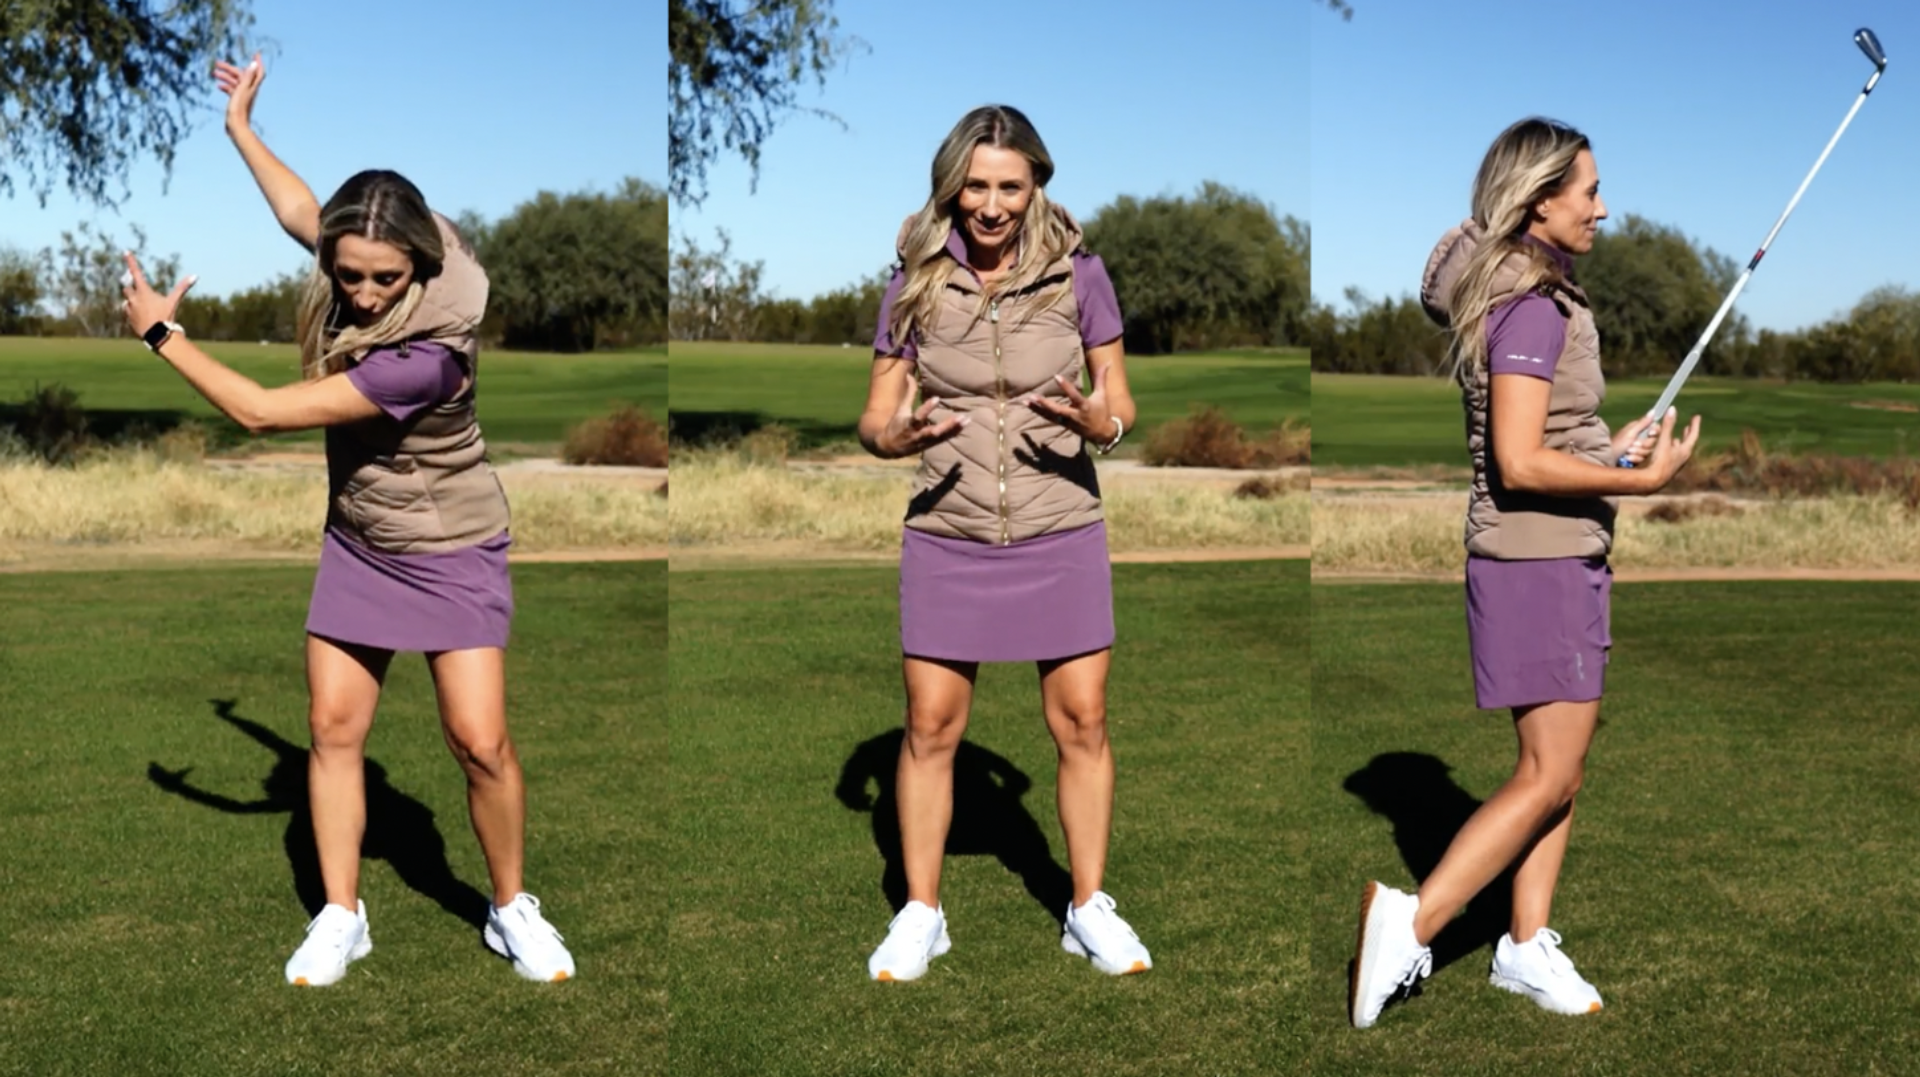 10 short-game rules that every golfer should follow